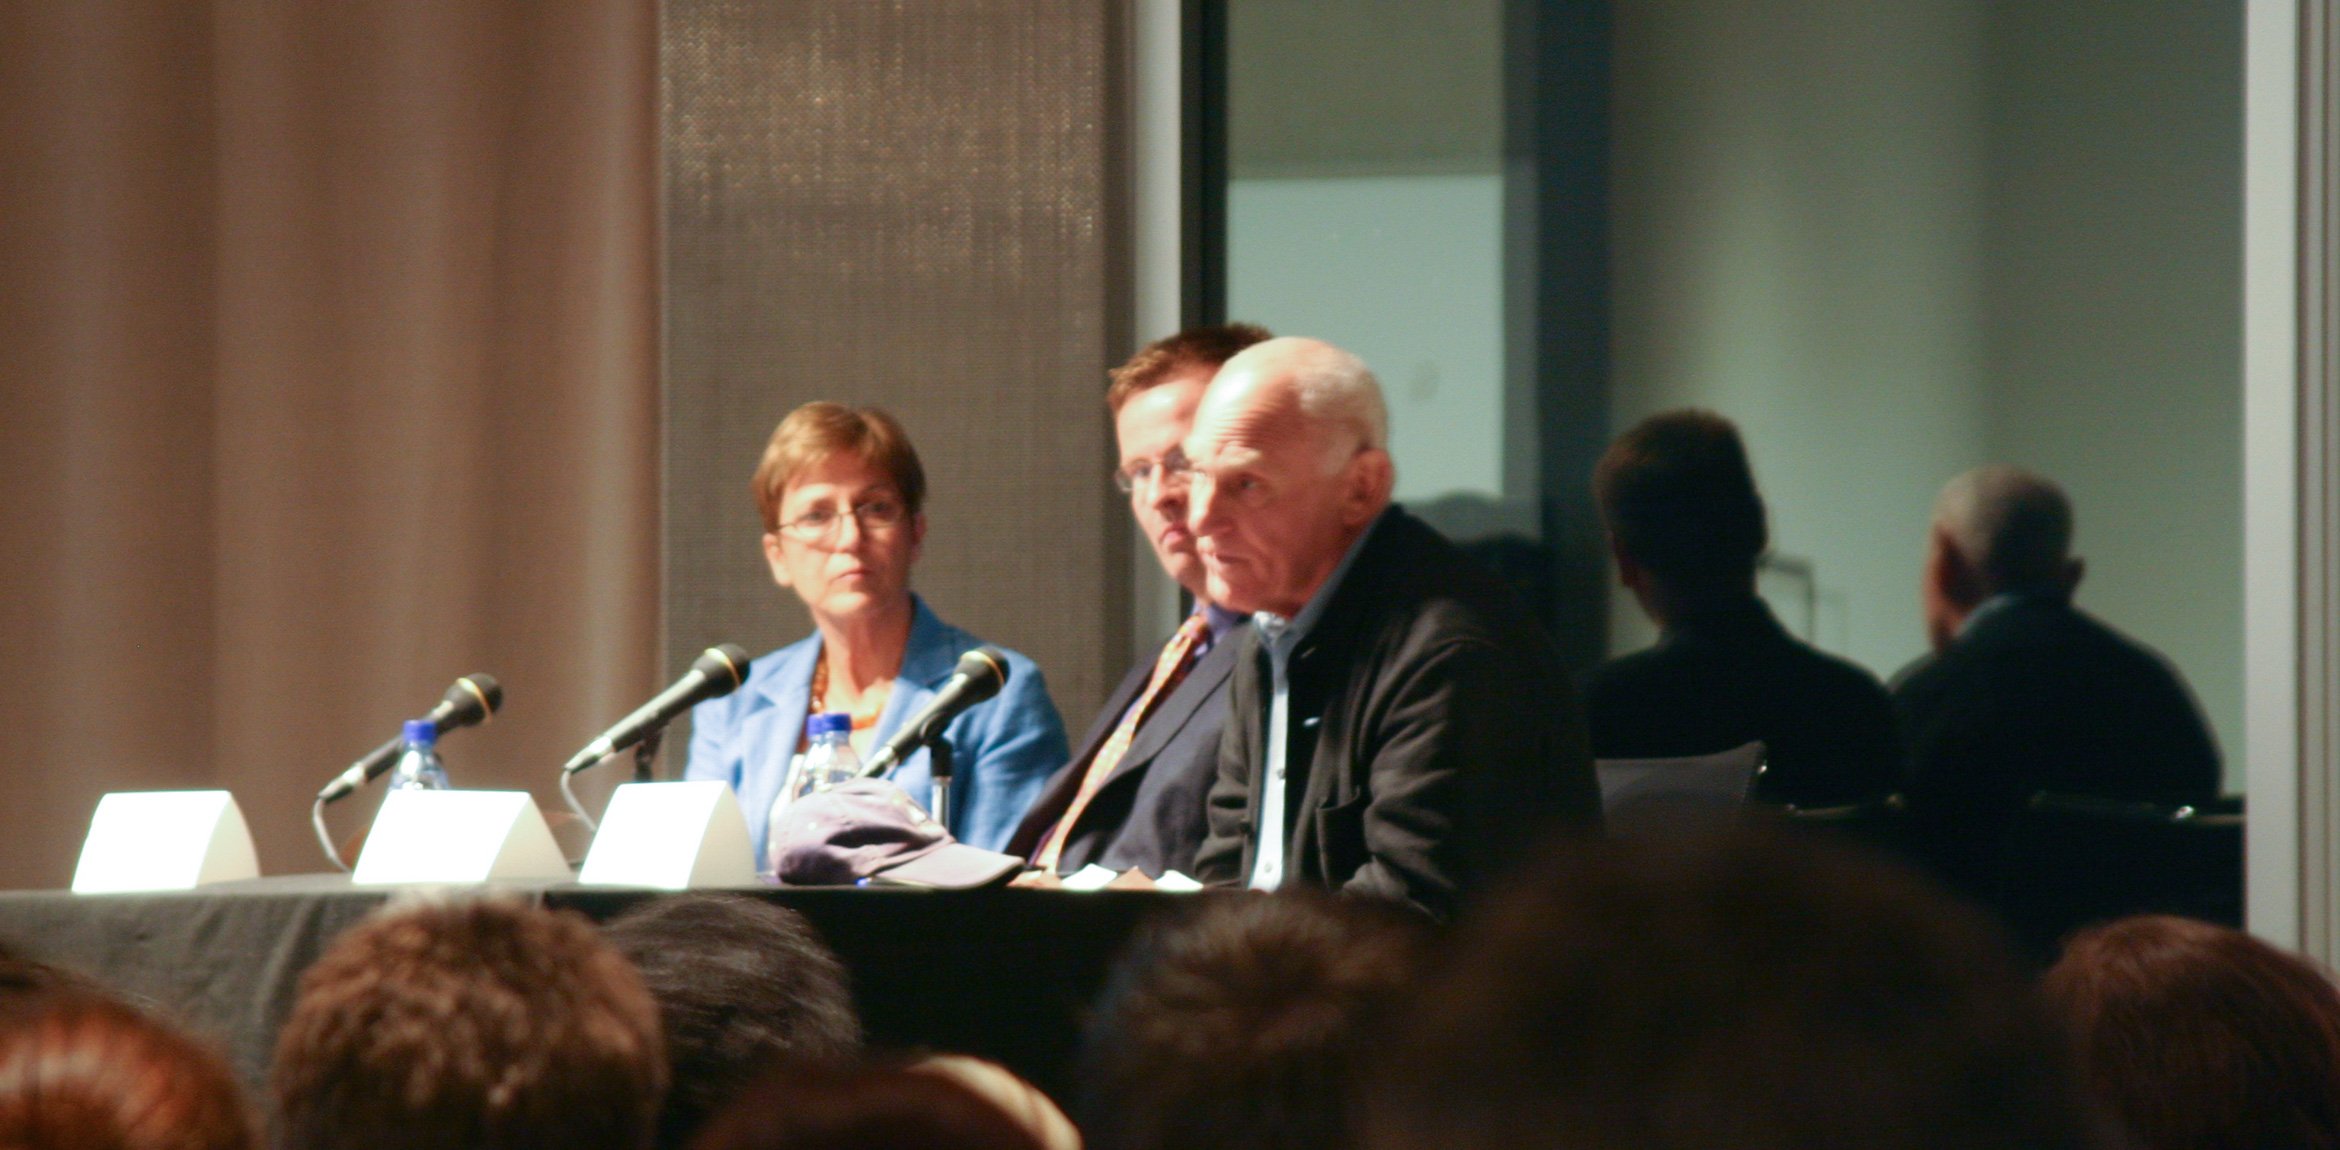 Richard Serra and Carmen Giménez sit at a panel table in front of an audience. Serra speaks into a microphone on the table.